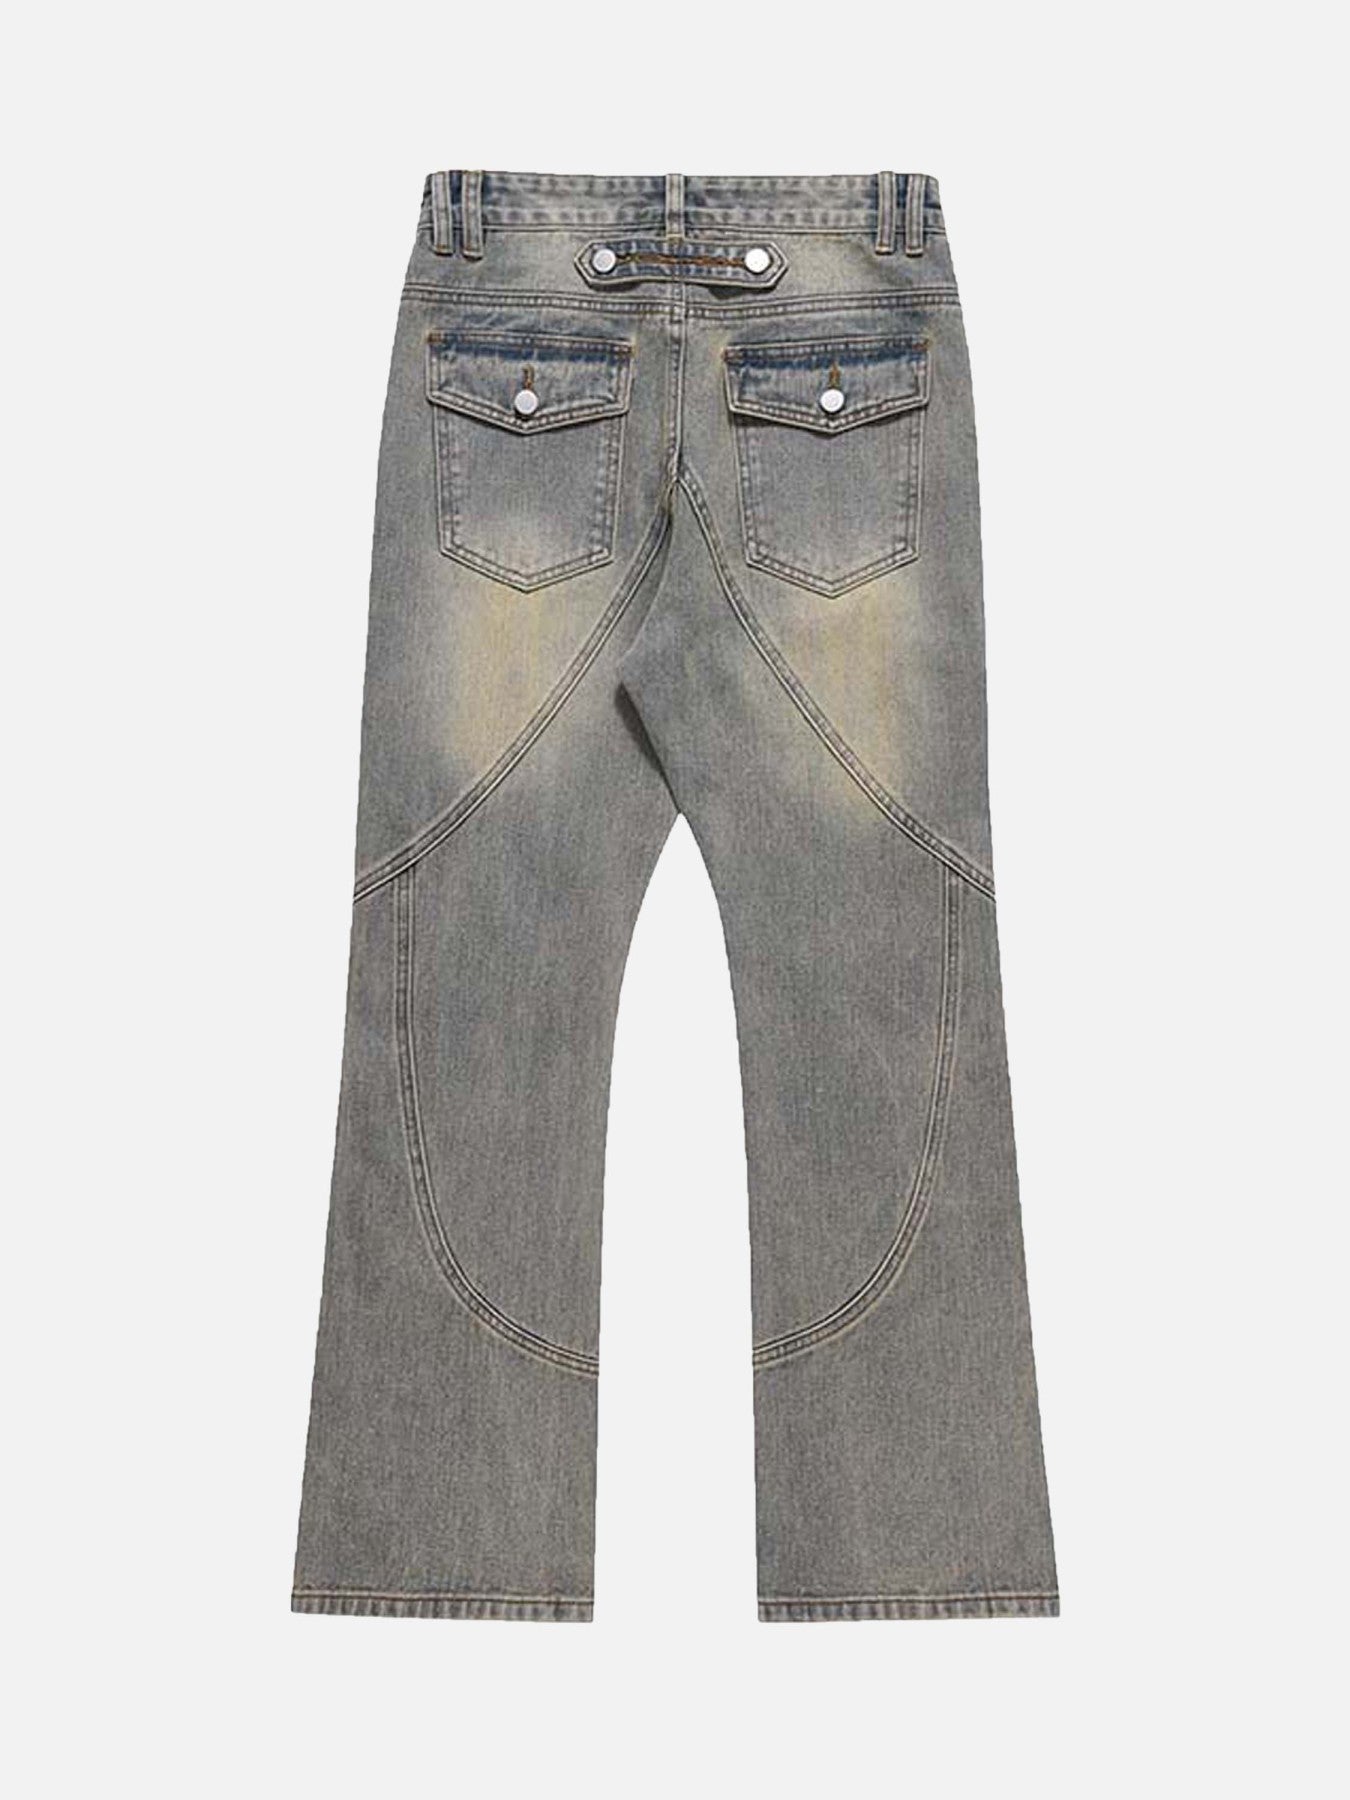 The Supermade Patchwork Stressed Jeans